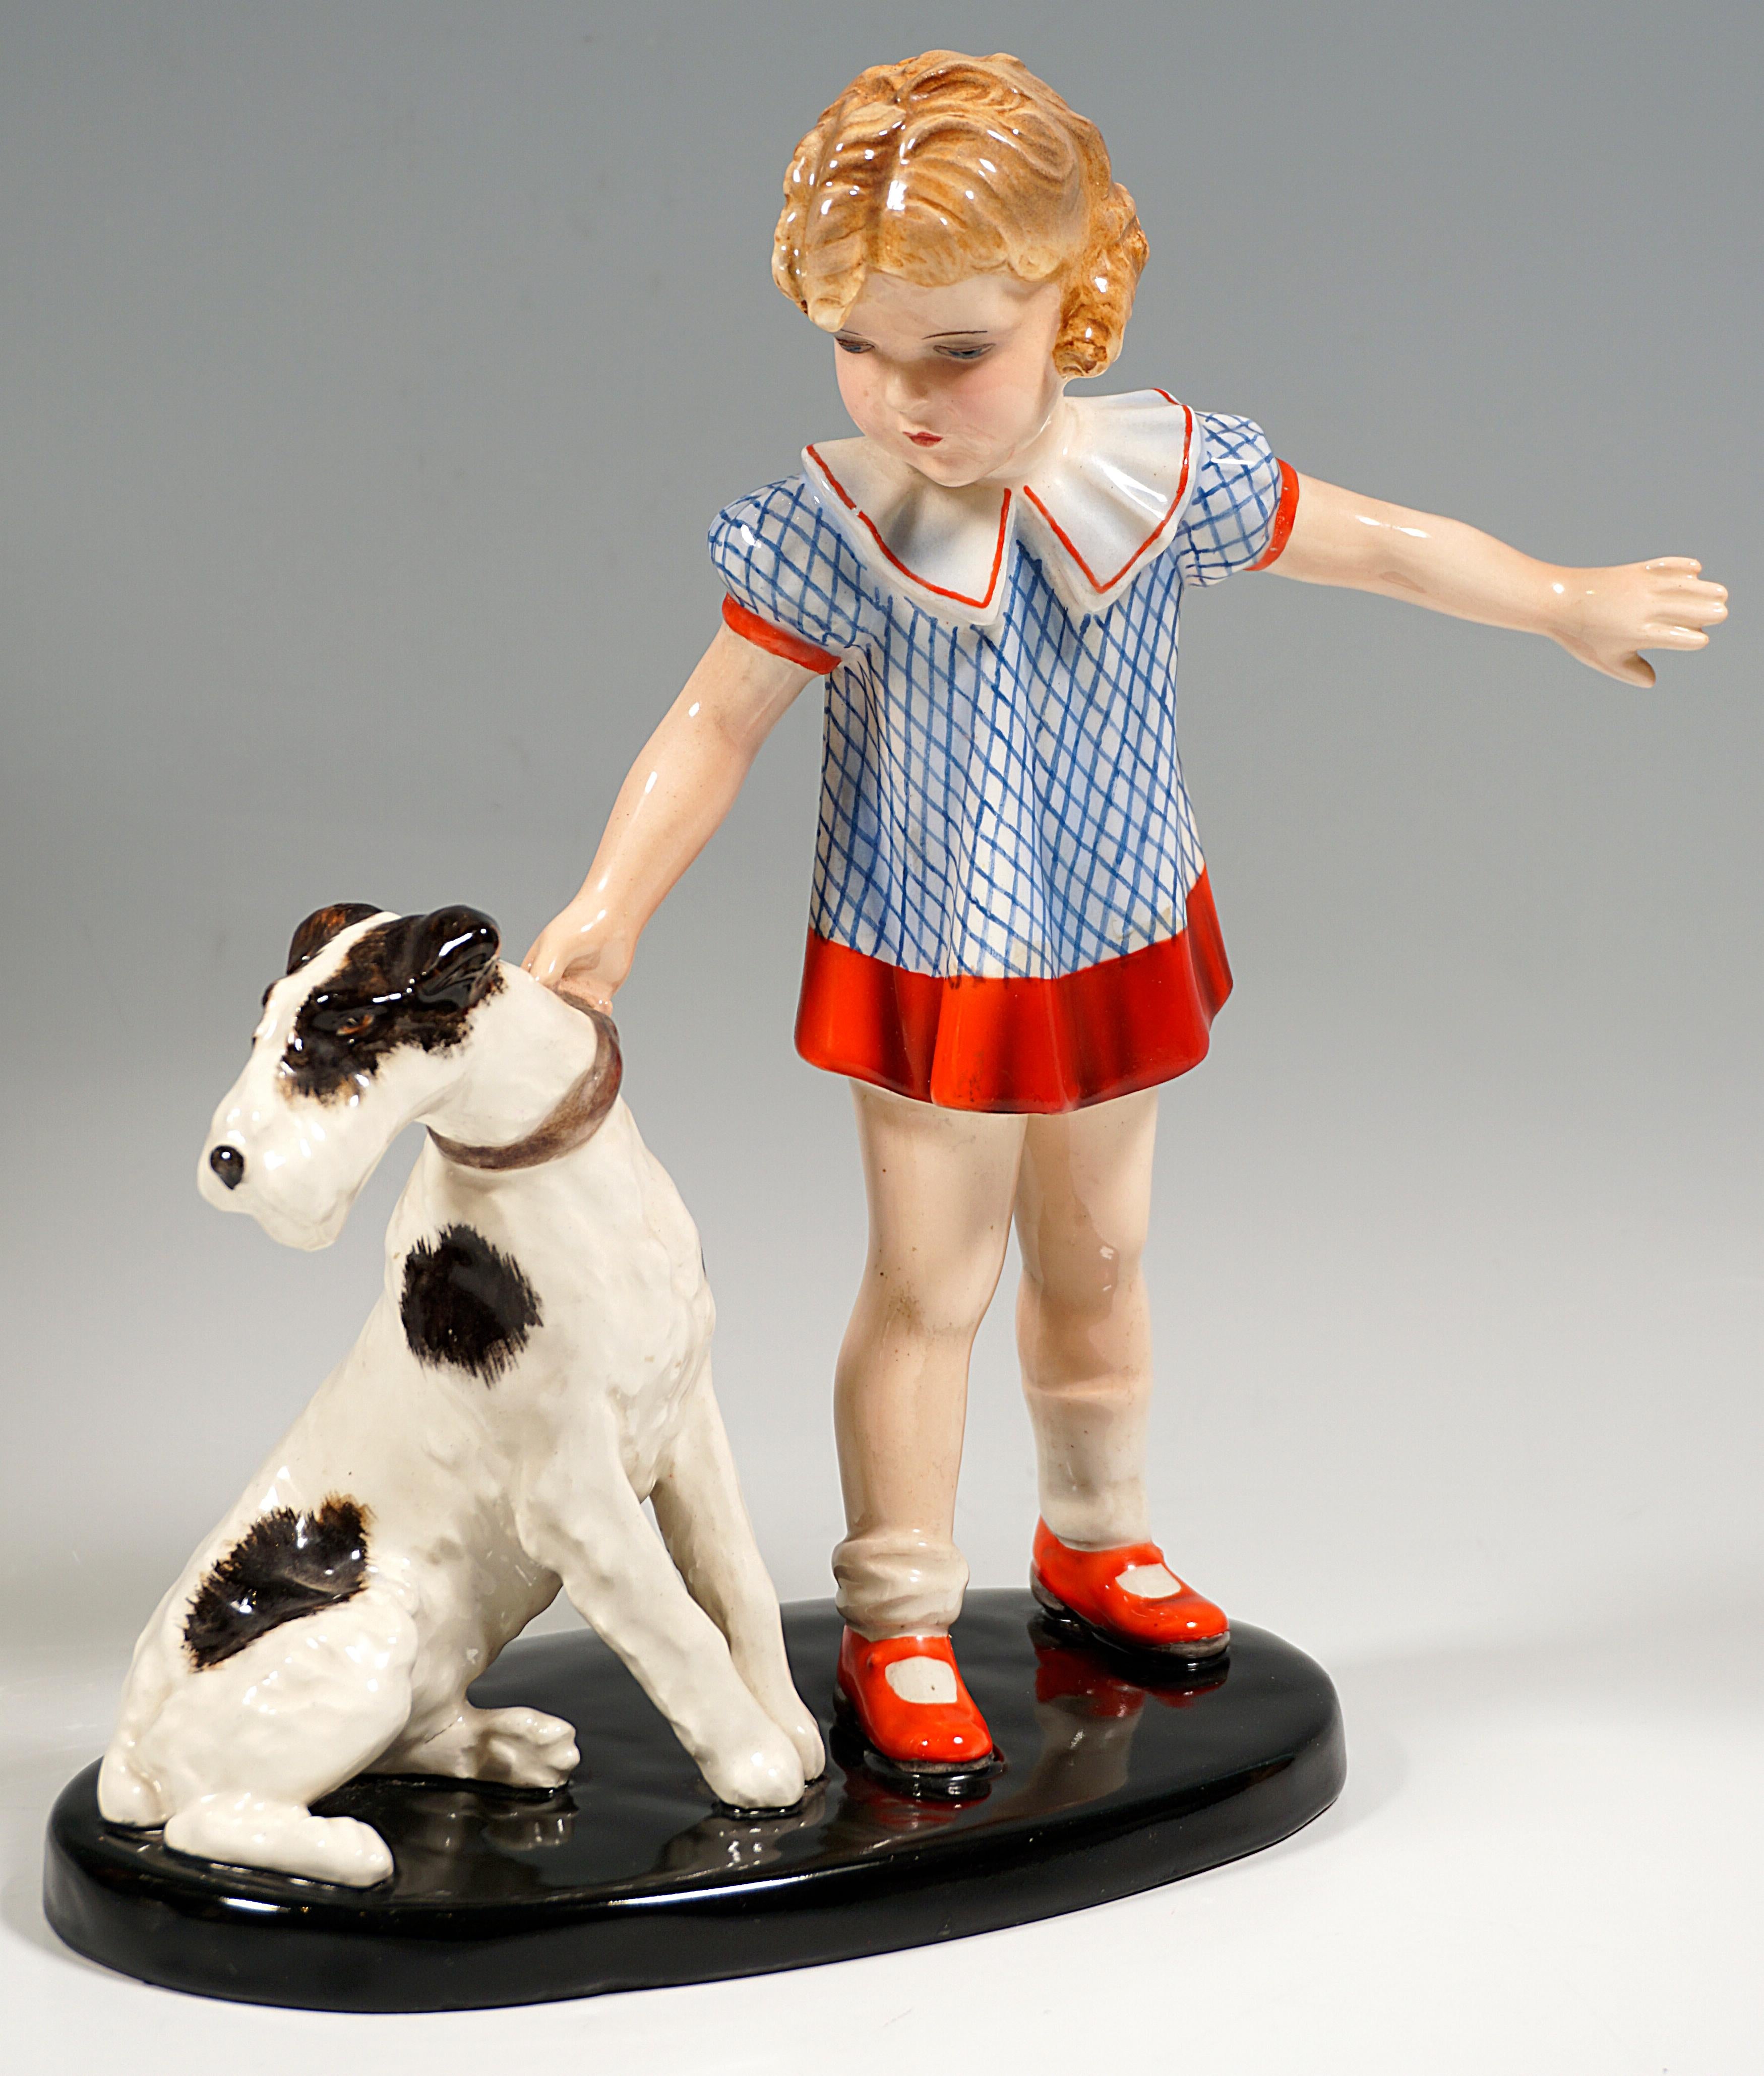 Hand-Crafted Goldscheider Figurine Group, Girl With Fox Terrier, by Germaine Bouret, 1938 For Sale